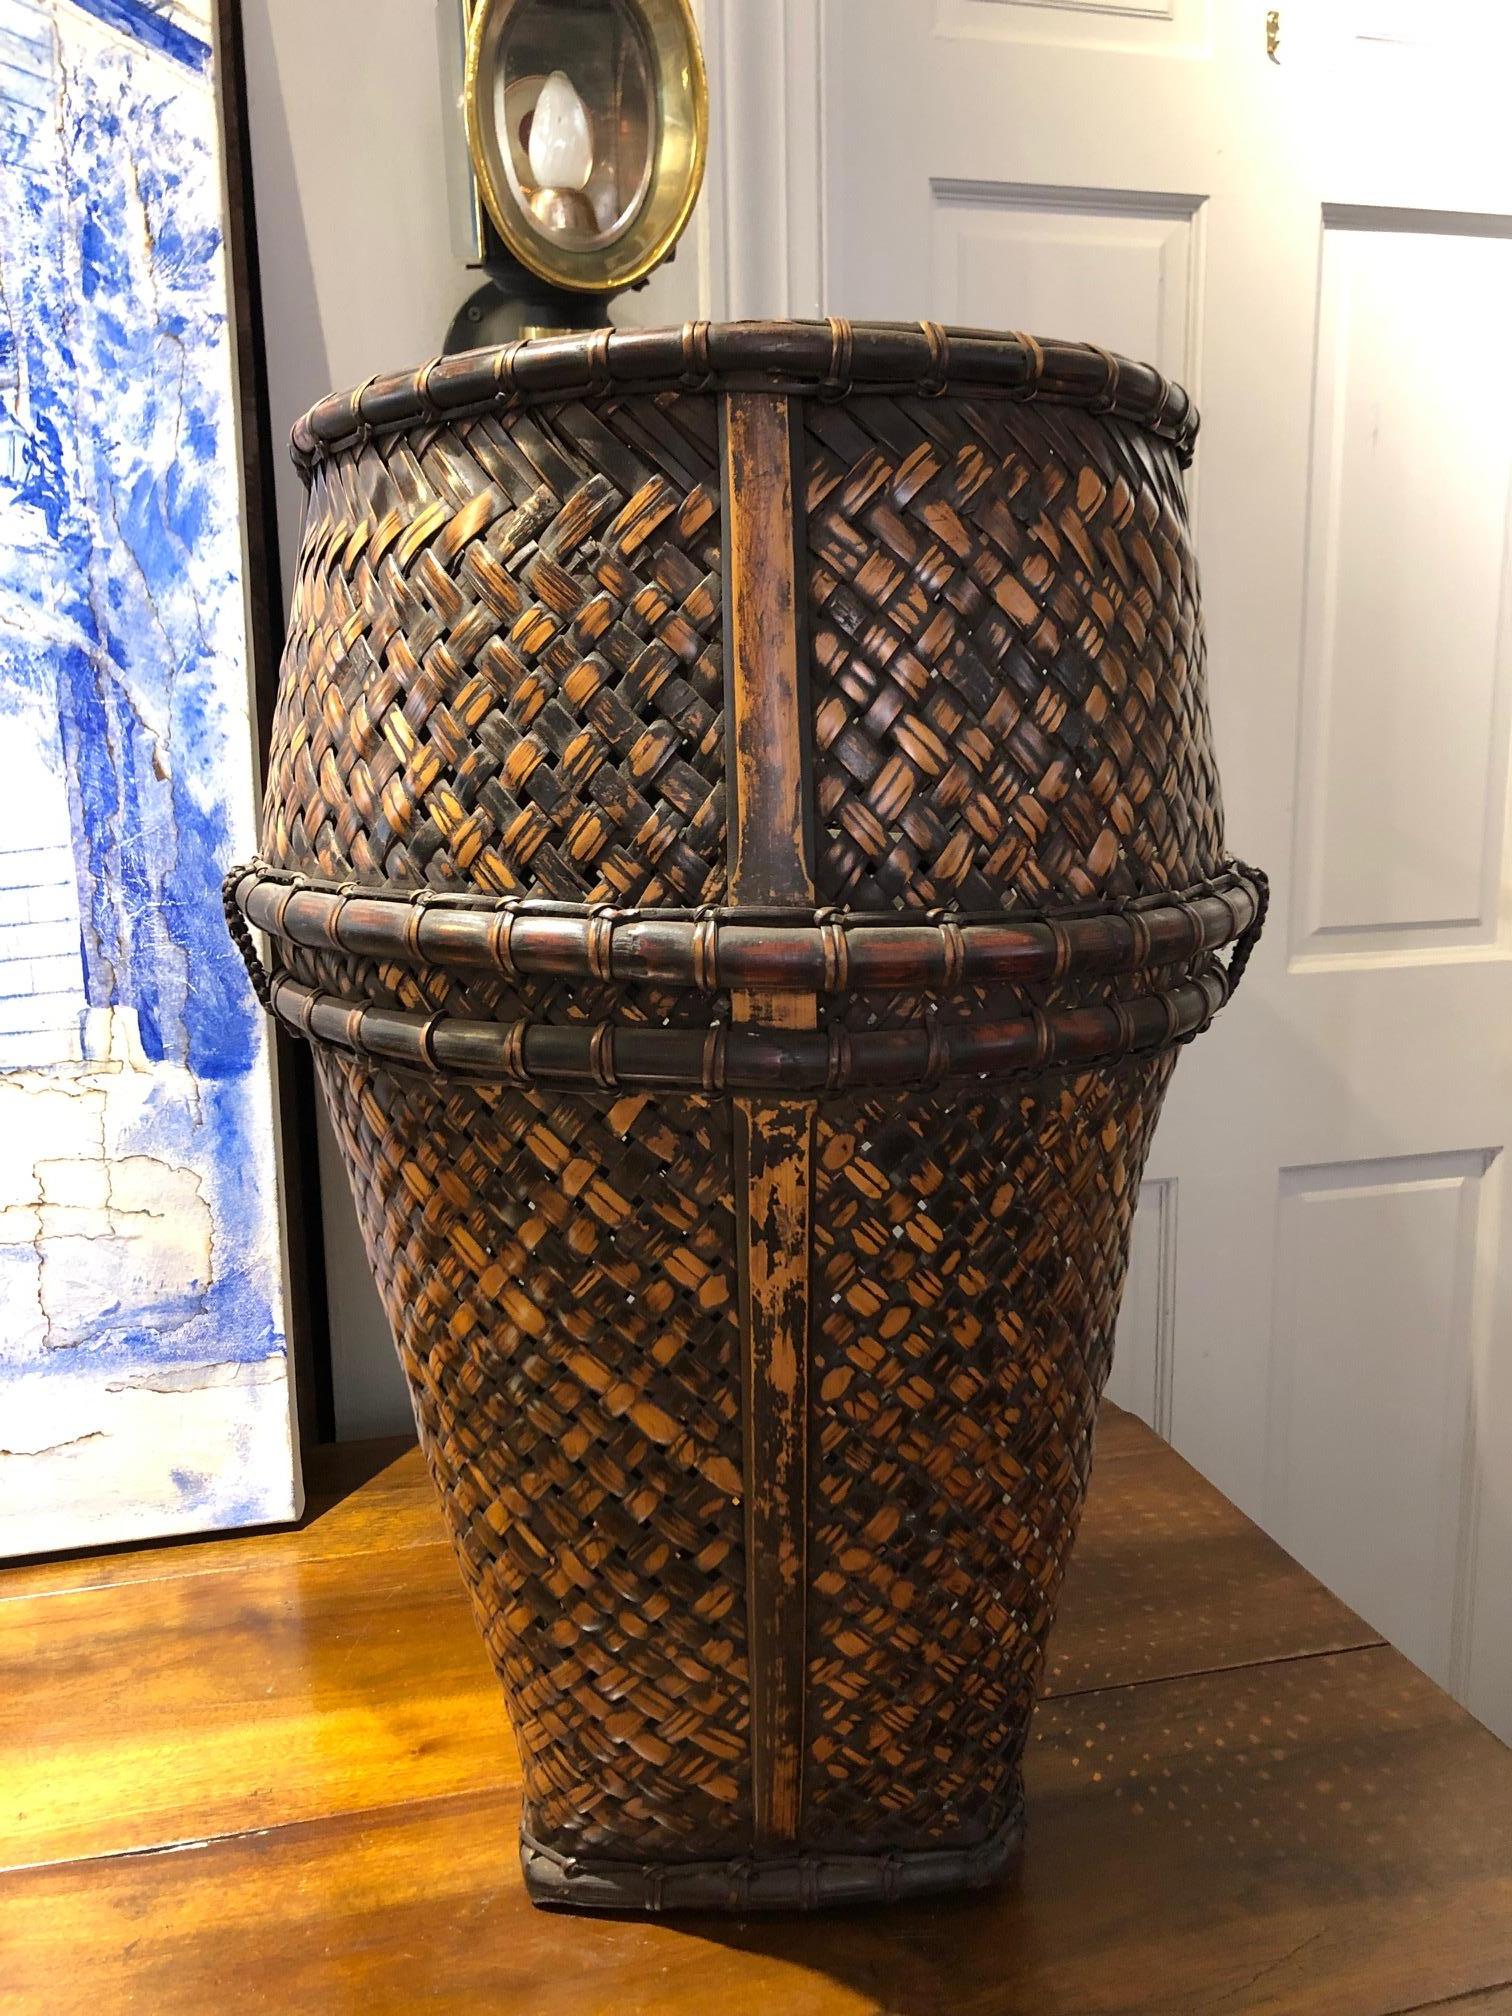 Beautiful handwoven Indonesian hauling basket made from rattan and bamboo with a remarkable deep color and patina. This Agrarian art makes for a beautiful display or storage piece in your home. 
Sulawesi, circa 1930.
Measures: 24